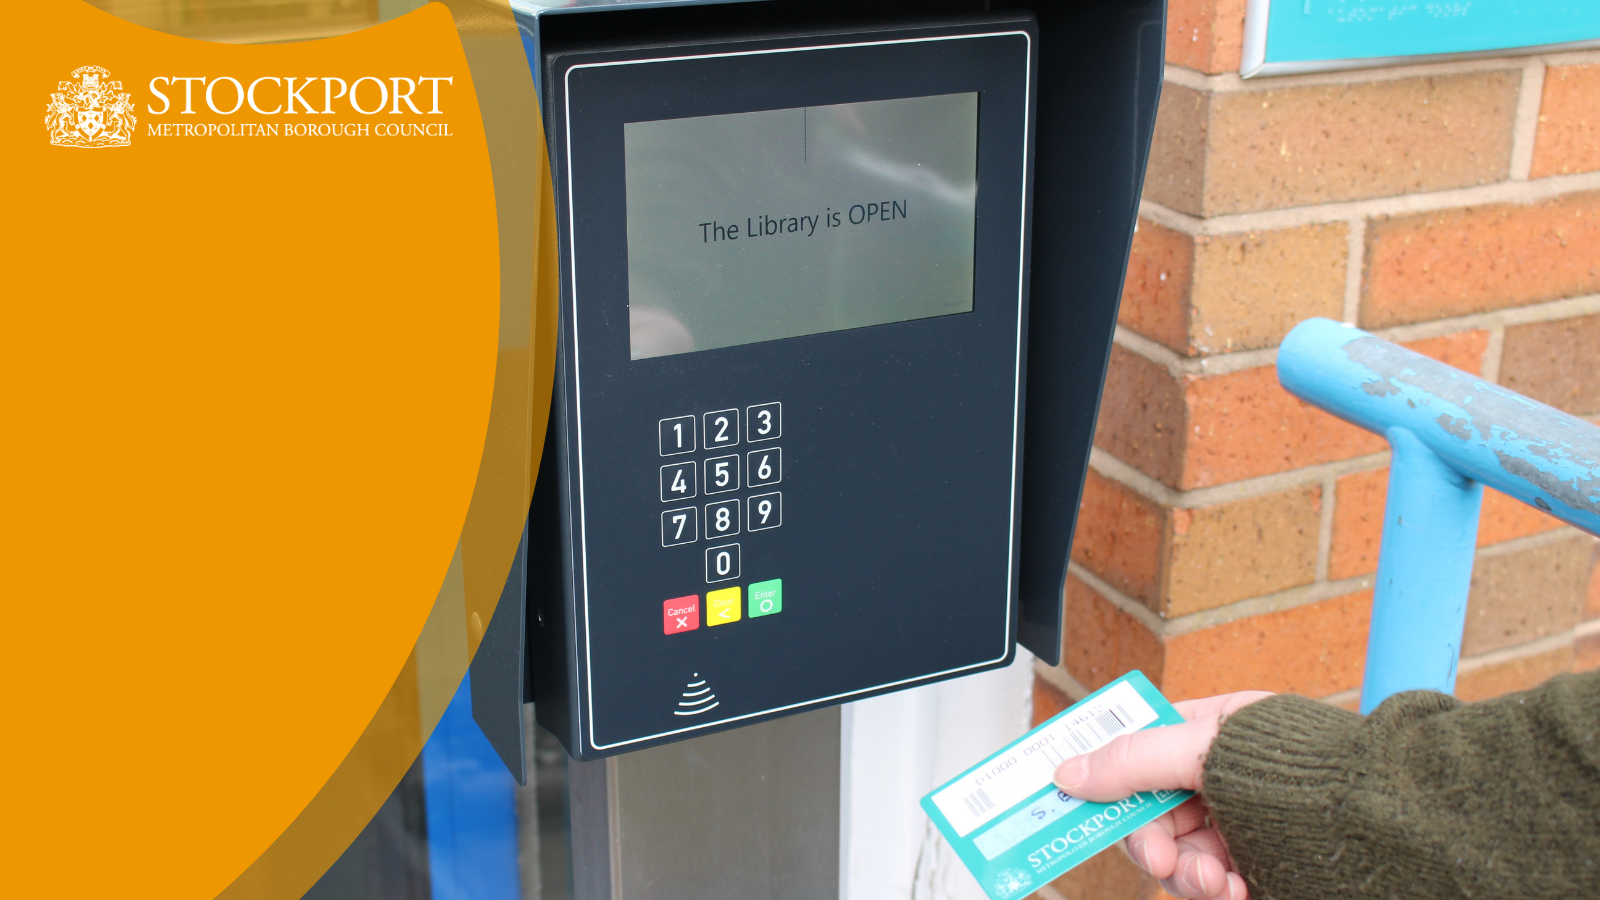 Open+ to be installed in four more Stockport libraries 